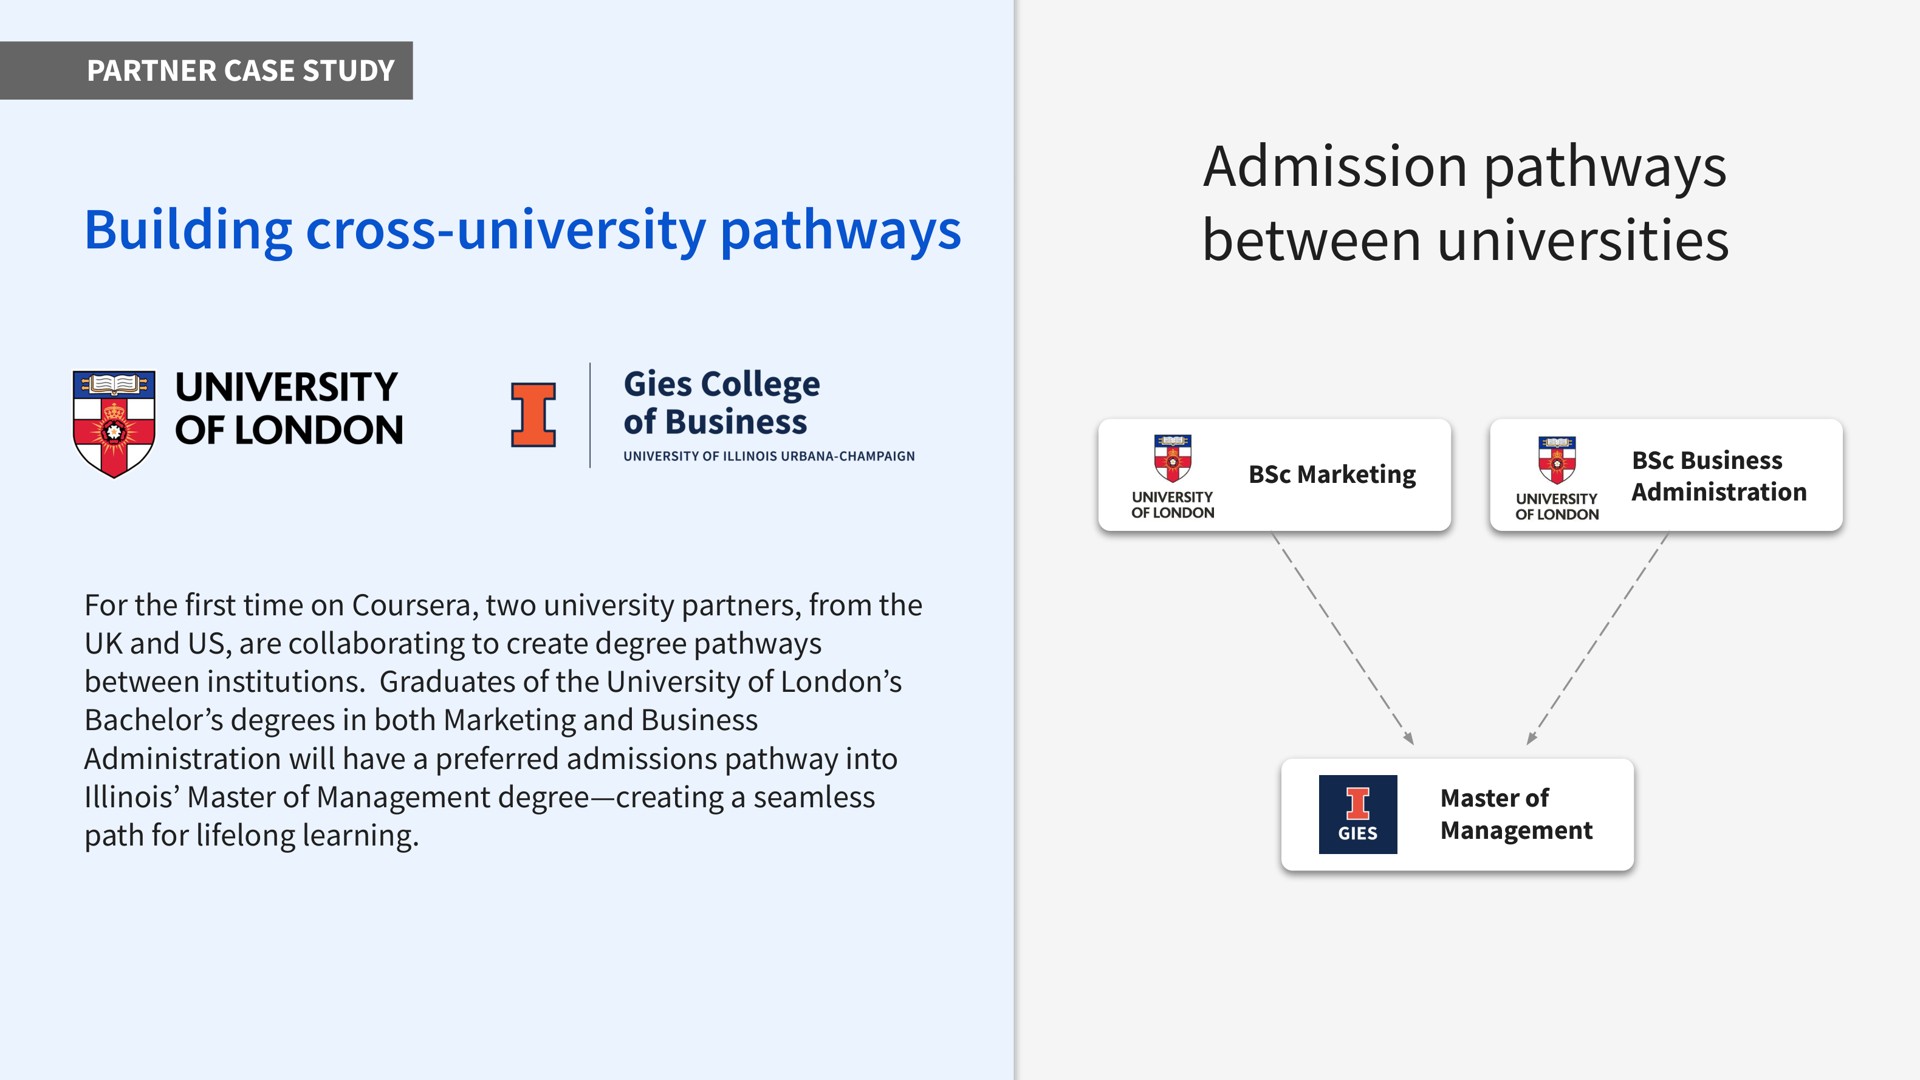 partner case study building cross university pathways admission pathways between universities marketing business administration for the first time on two university partners from the and us are collaborating to create degree pathways between institutions graduates of the university of bachelor degrees in both marketing and business administration will have a preferred admissions pathway into master of management degree creating a seamless path for lifelong learning master of management | Coursera